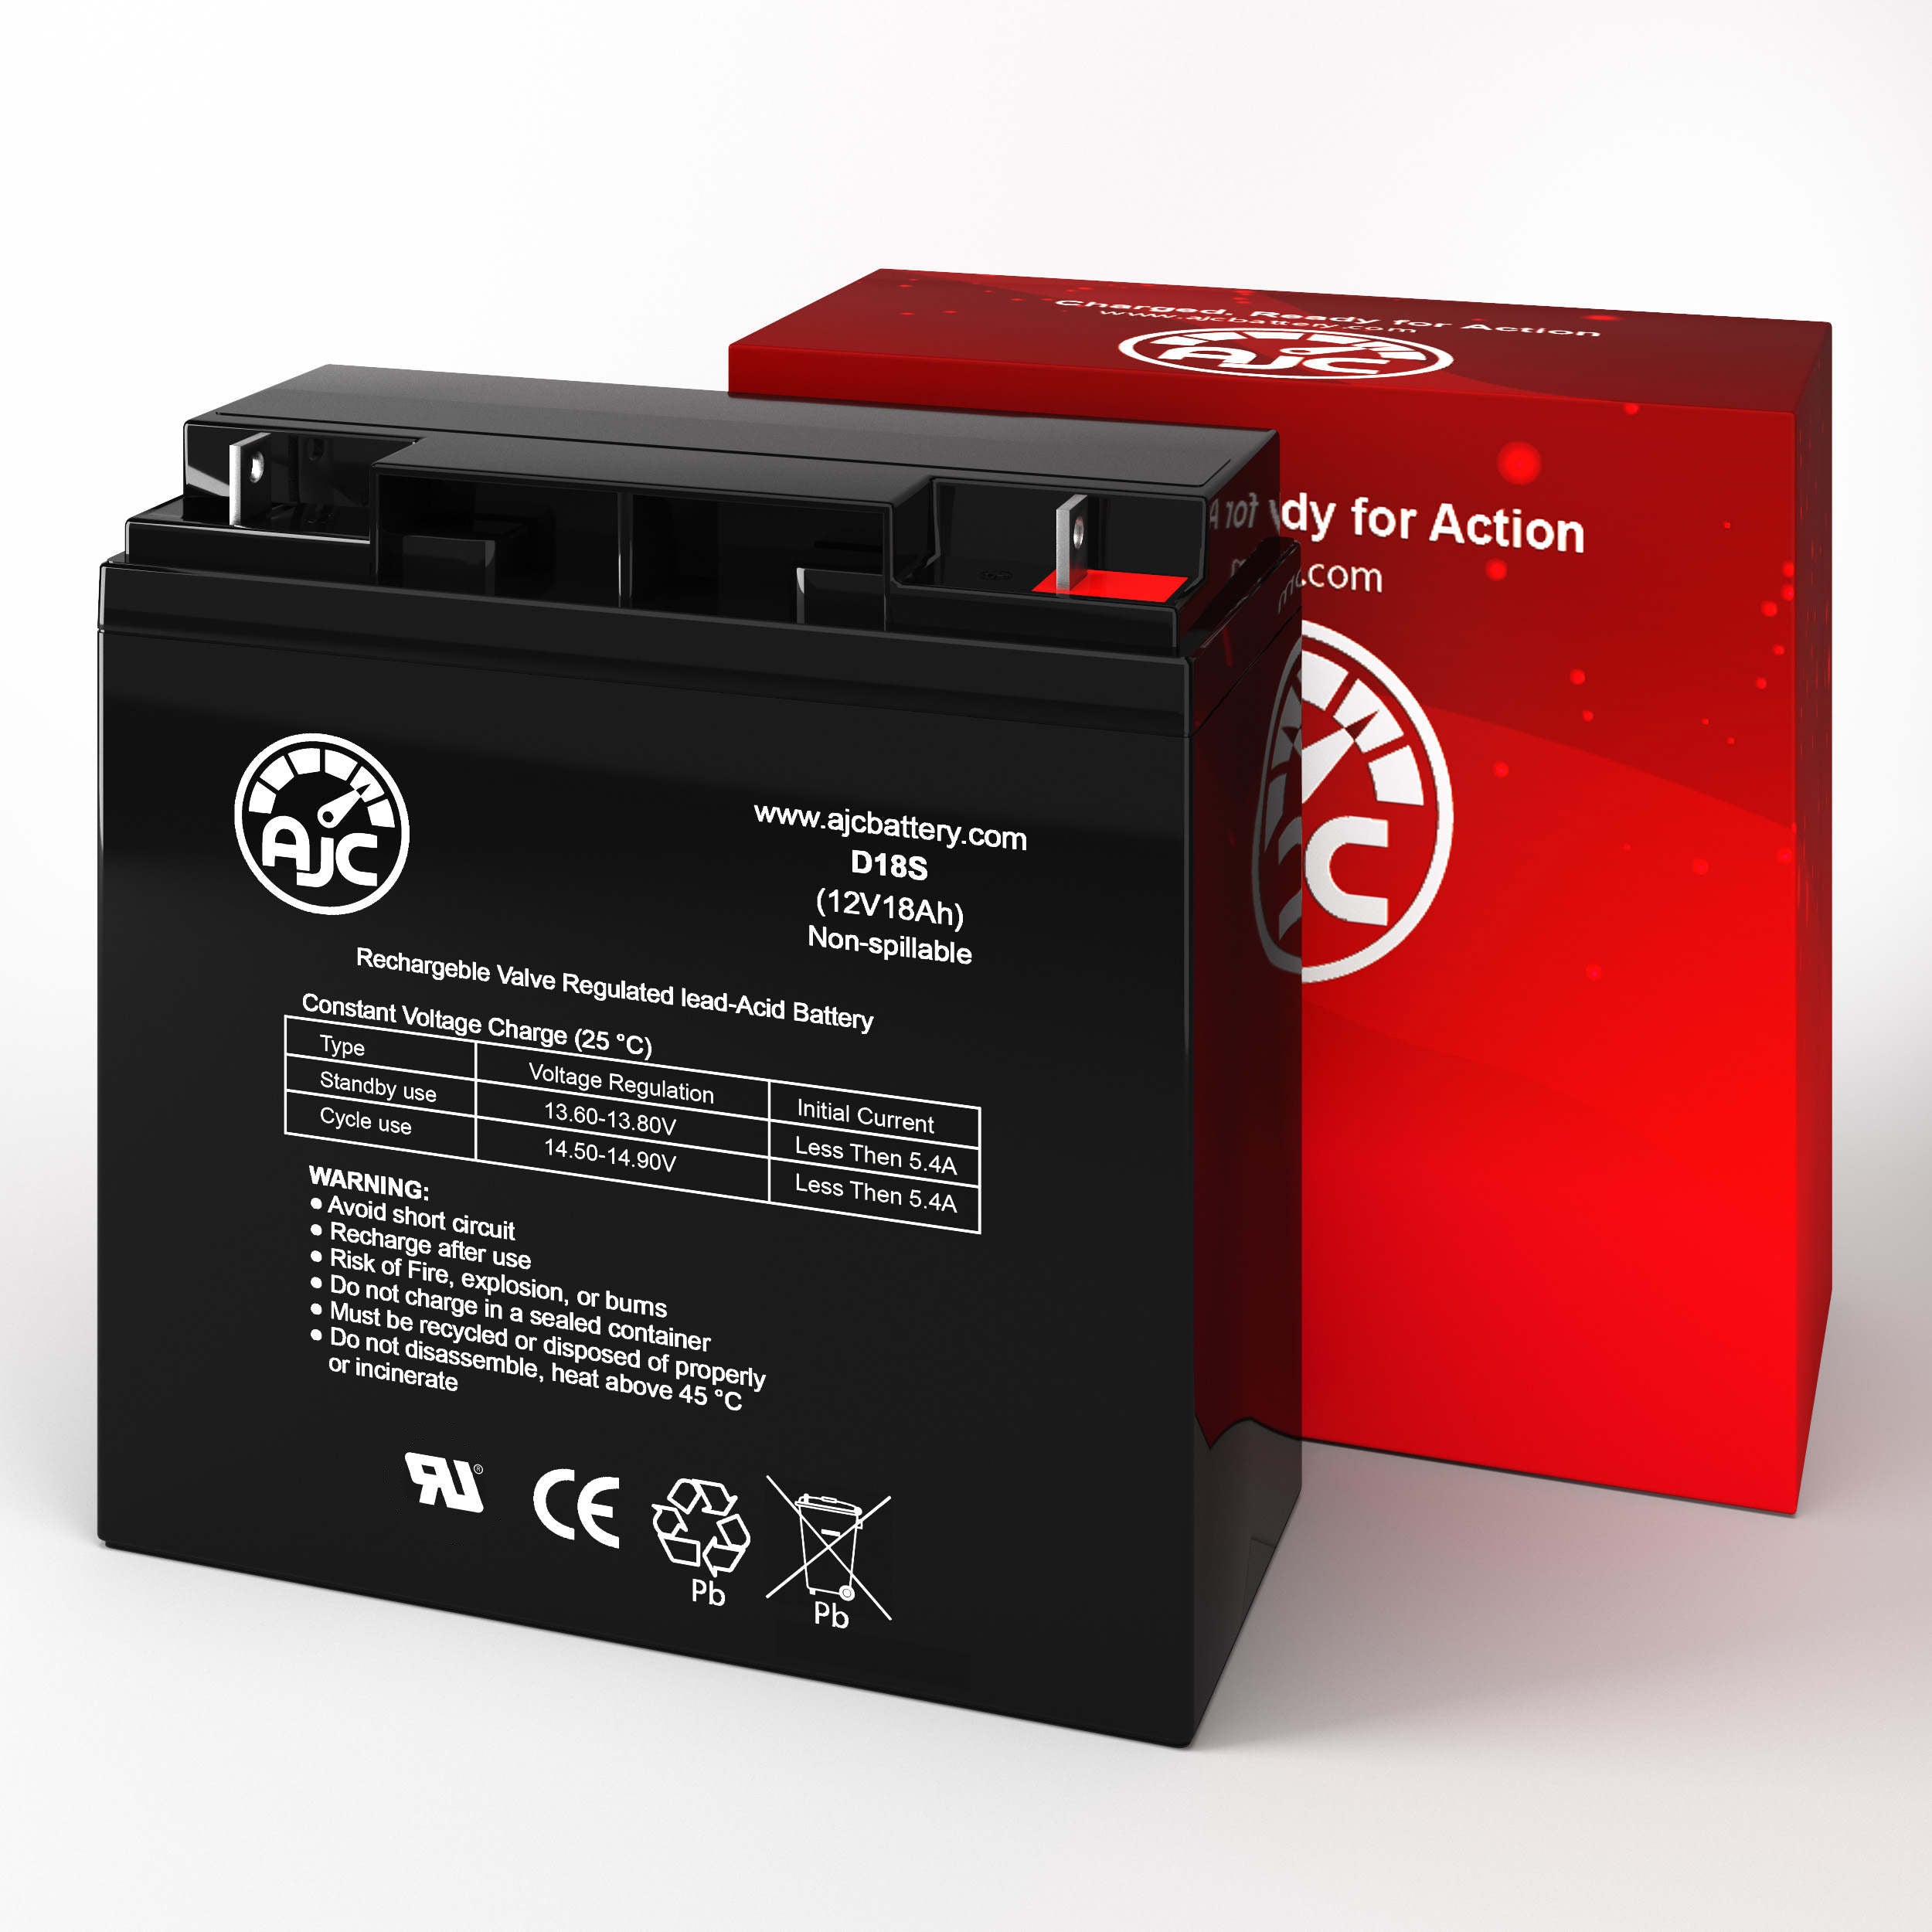 AC Delco M1924 12V 18Ah Sealed Lead Acid Battery - This Is an AJC Brand Replacement - image 2 of 6